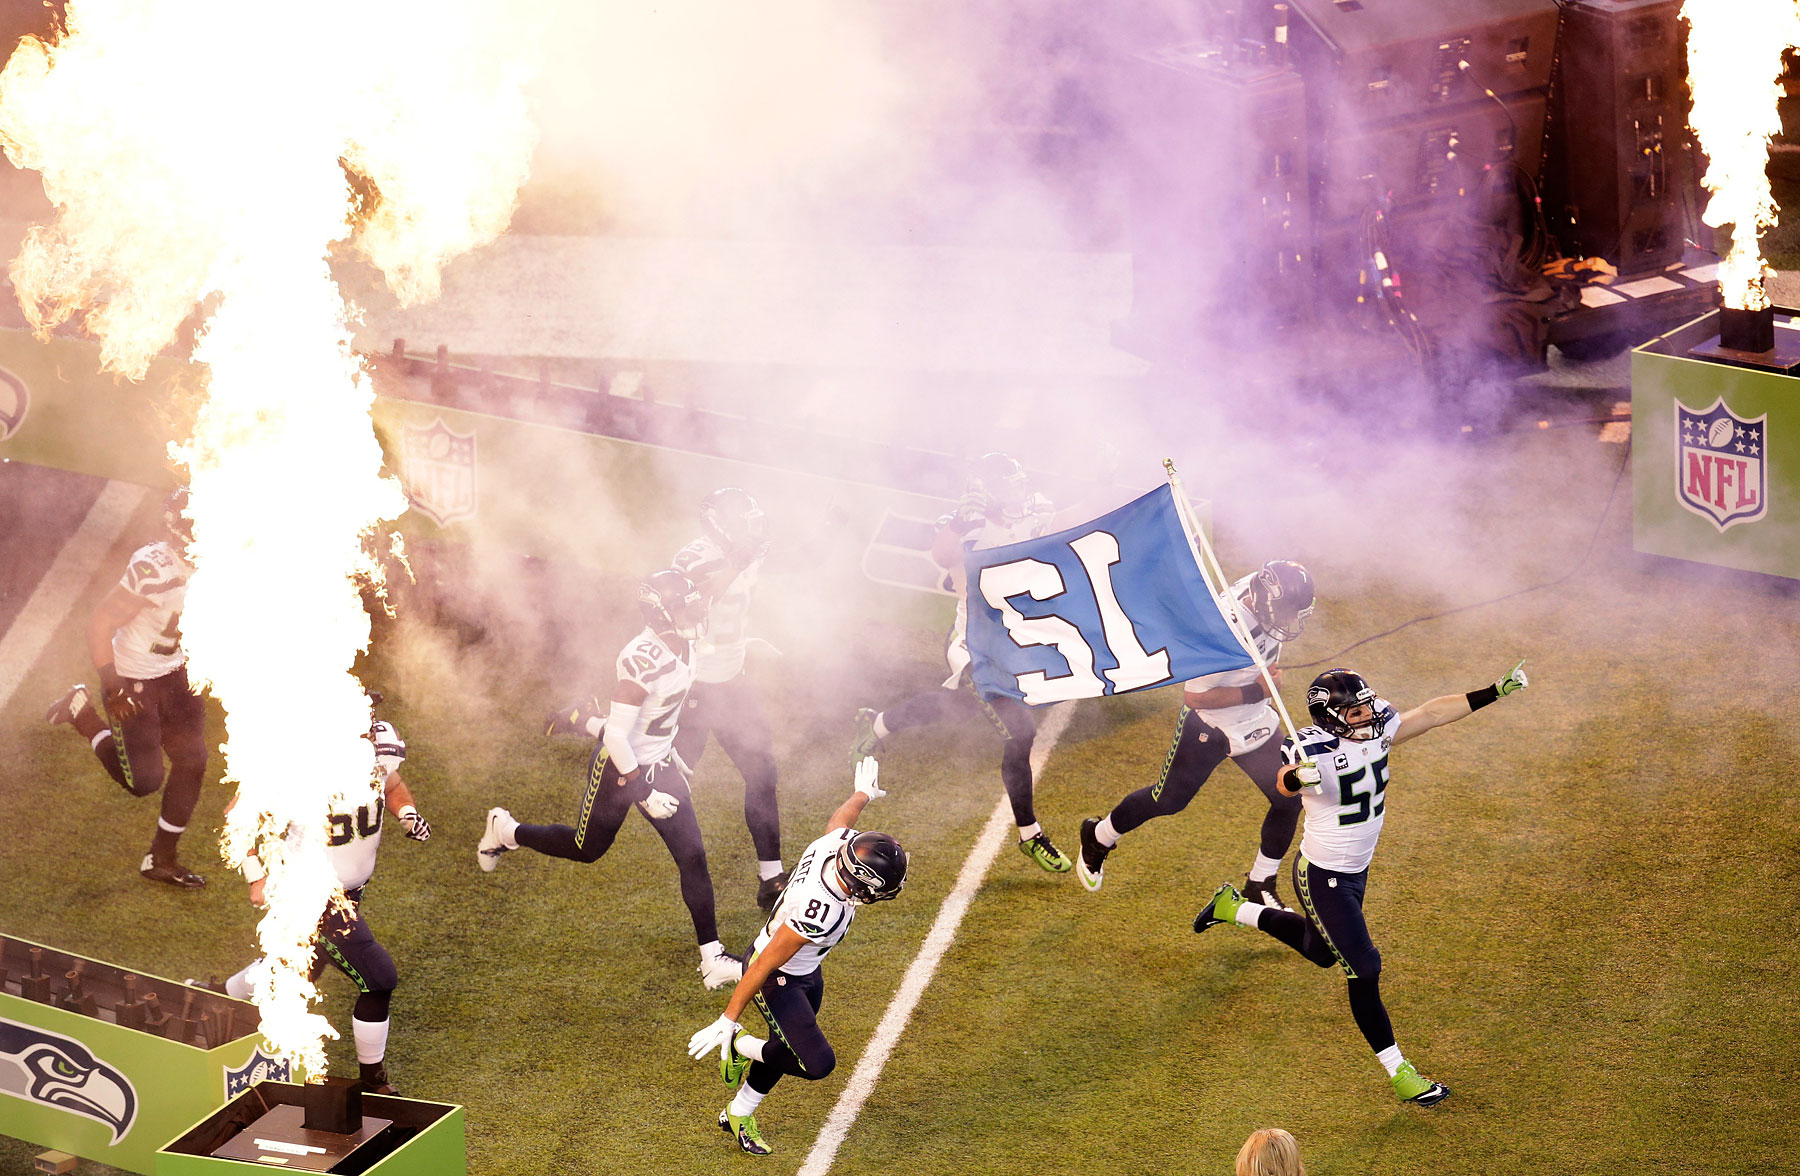 Linebacker Heath Farwell of the Seattle Seahawks leads the team onto the field at start of Super Bowl XLVIII .